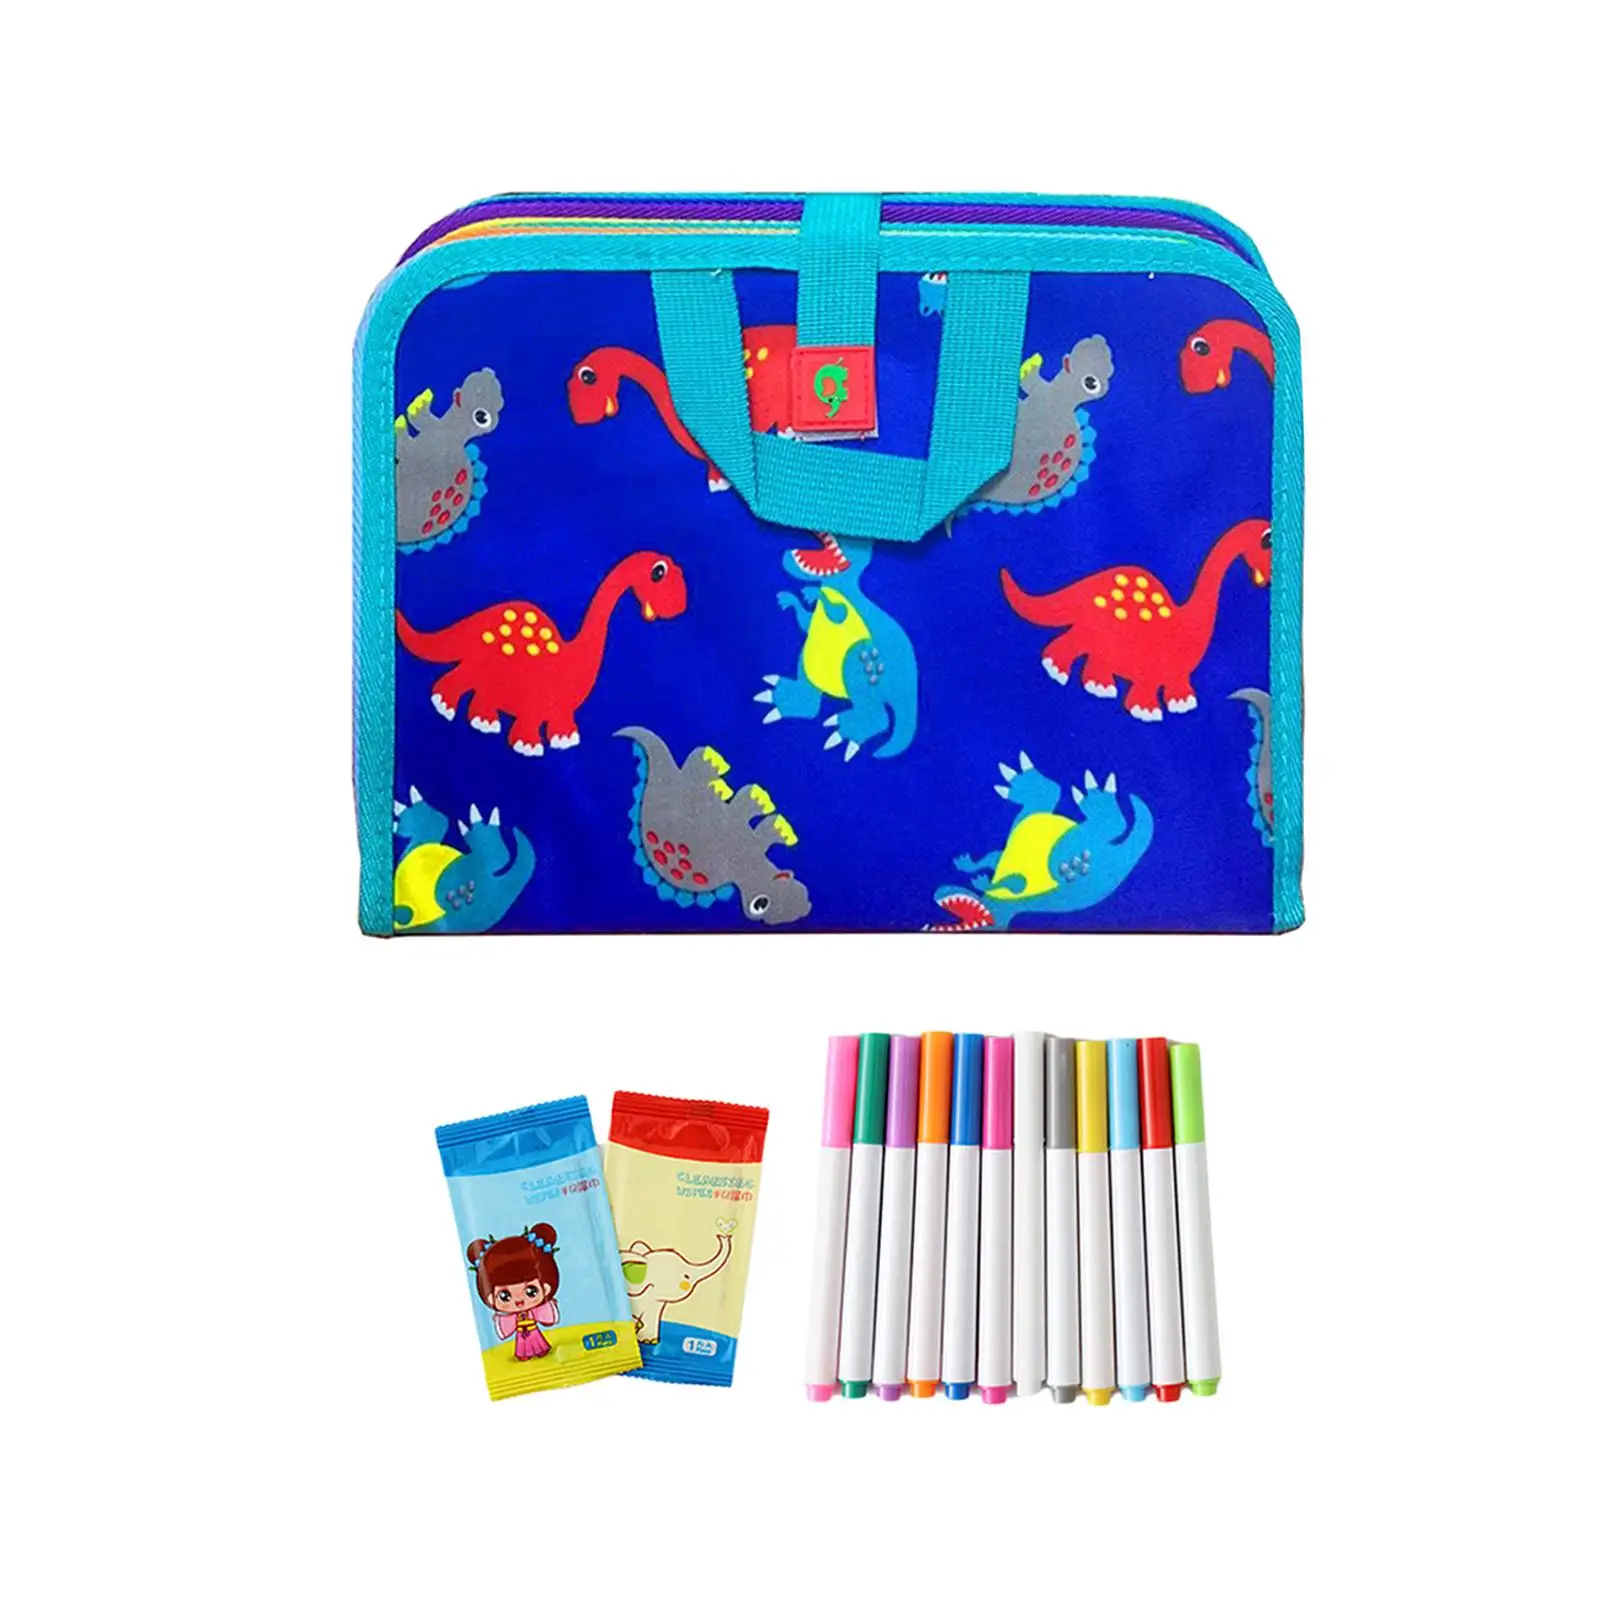 Erasable Book Doodle Set Painting Toys Xmas Gifts Road Trips Game Boys Girls Ages 3+ with 12 Watercolor Pens Reusable